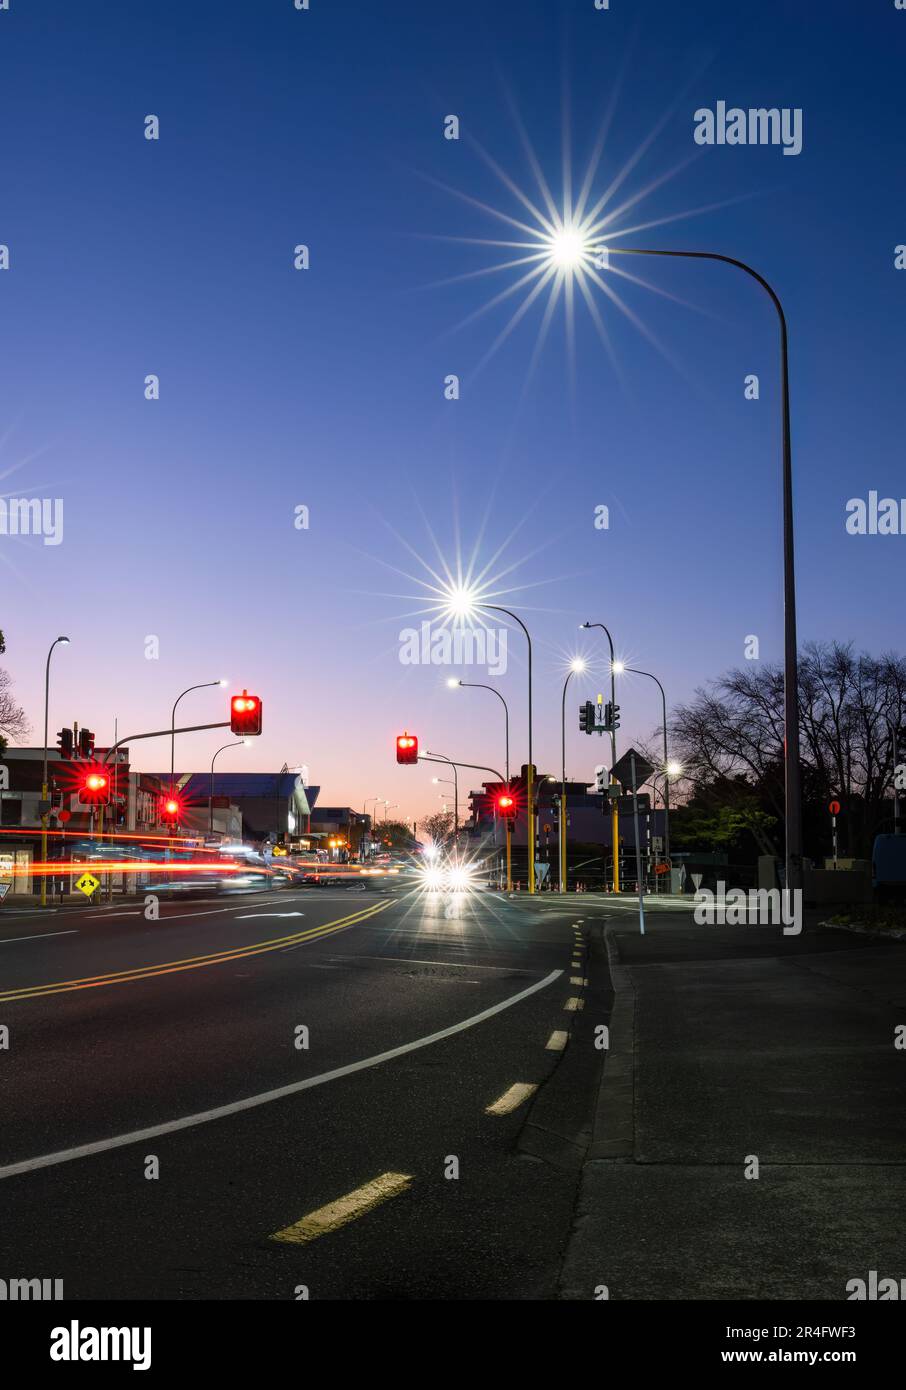 Car light trails at red traffic light on road intersection. Auckland. Vertical format. Stock Photo